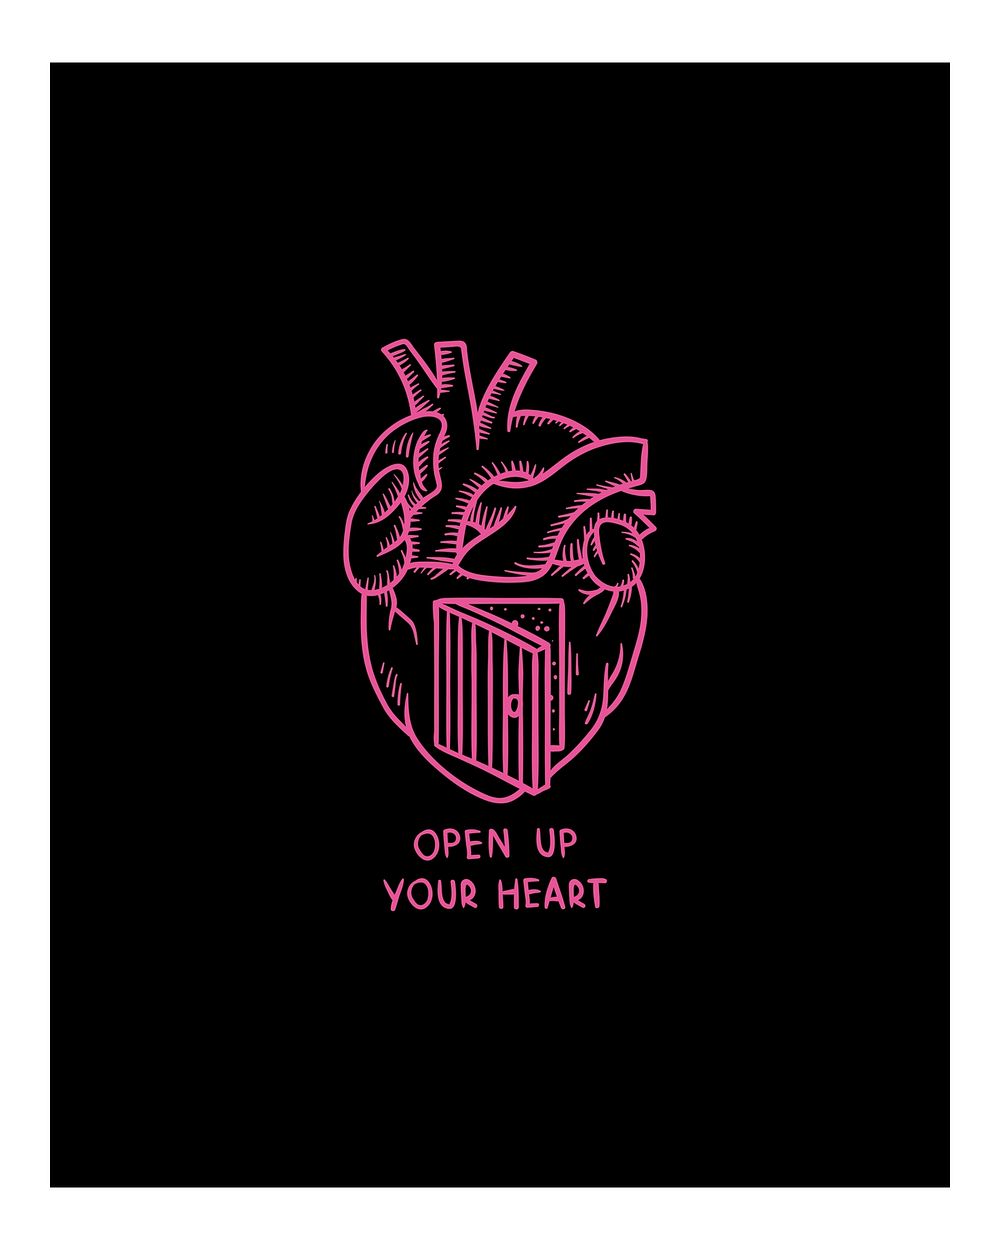 Pink heart illustration wall art print and poster.